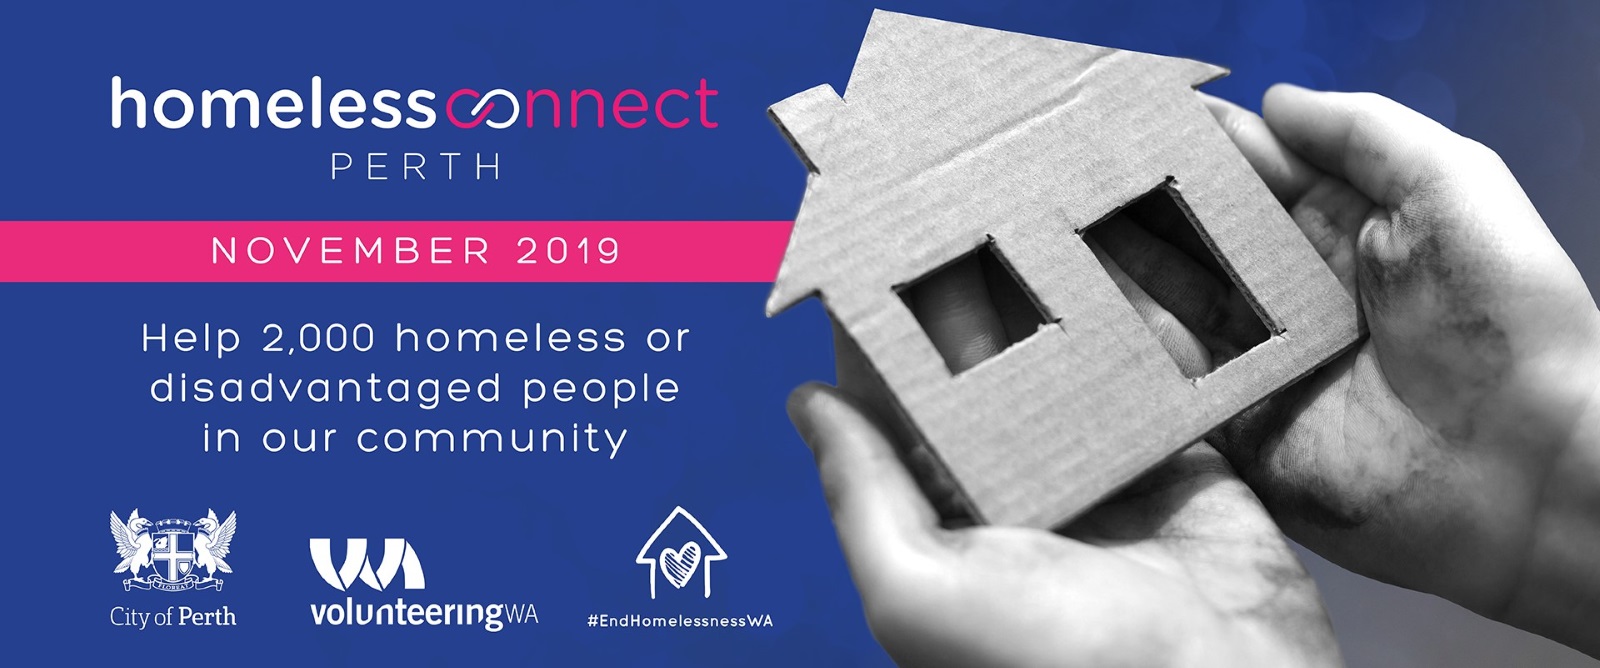 Homeless Connect Perth 2019